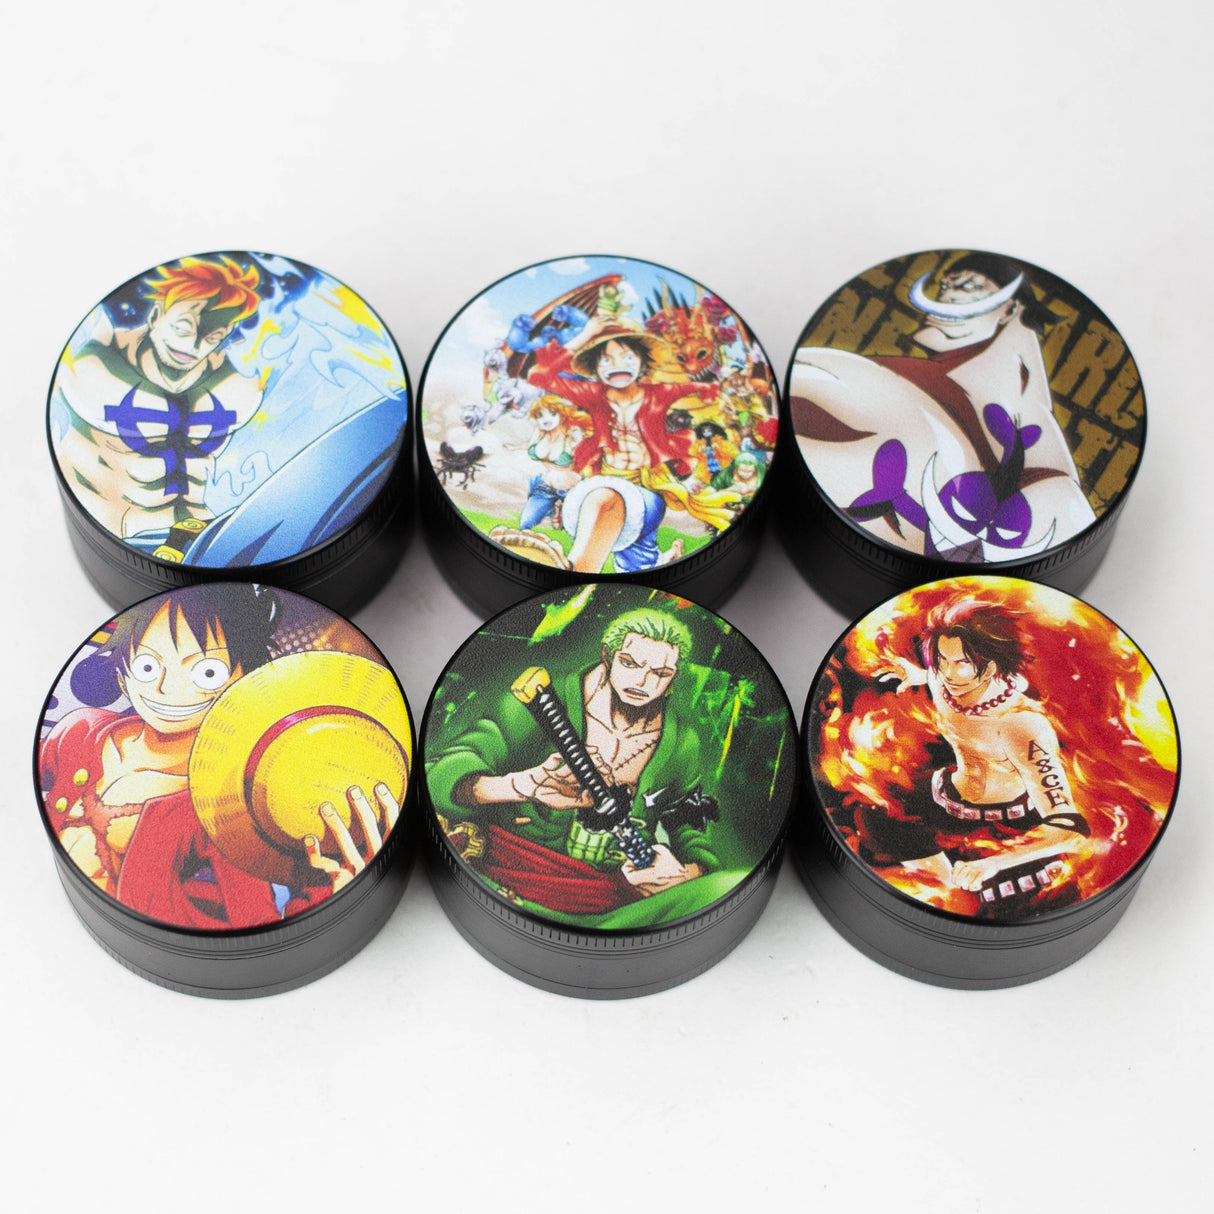 2" Metal Grinder with Comic Design 3 Layers Box of 12 [GZ629]